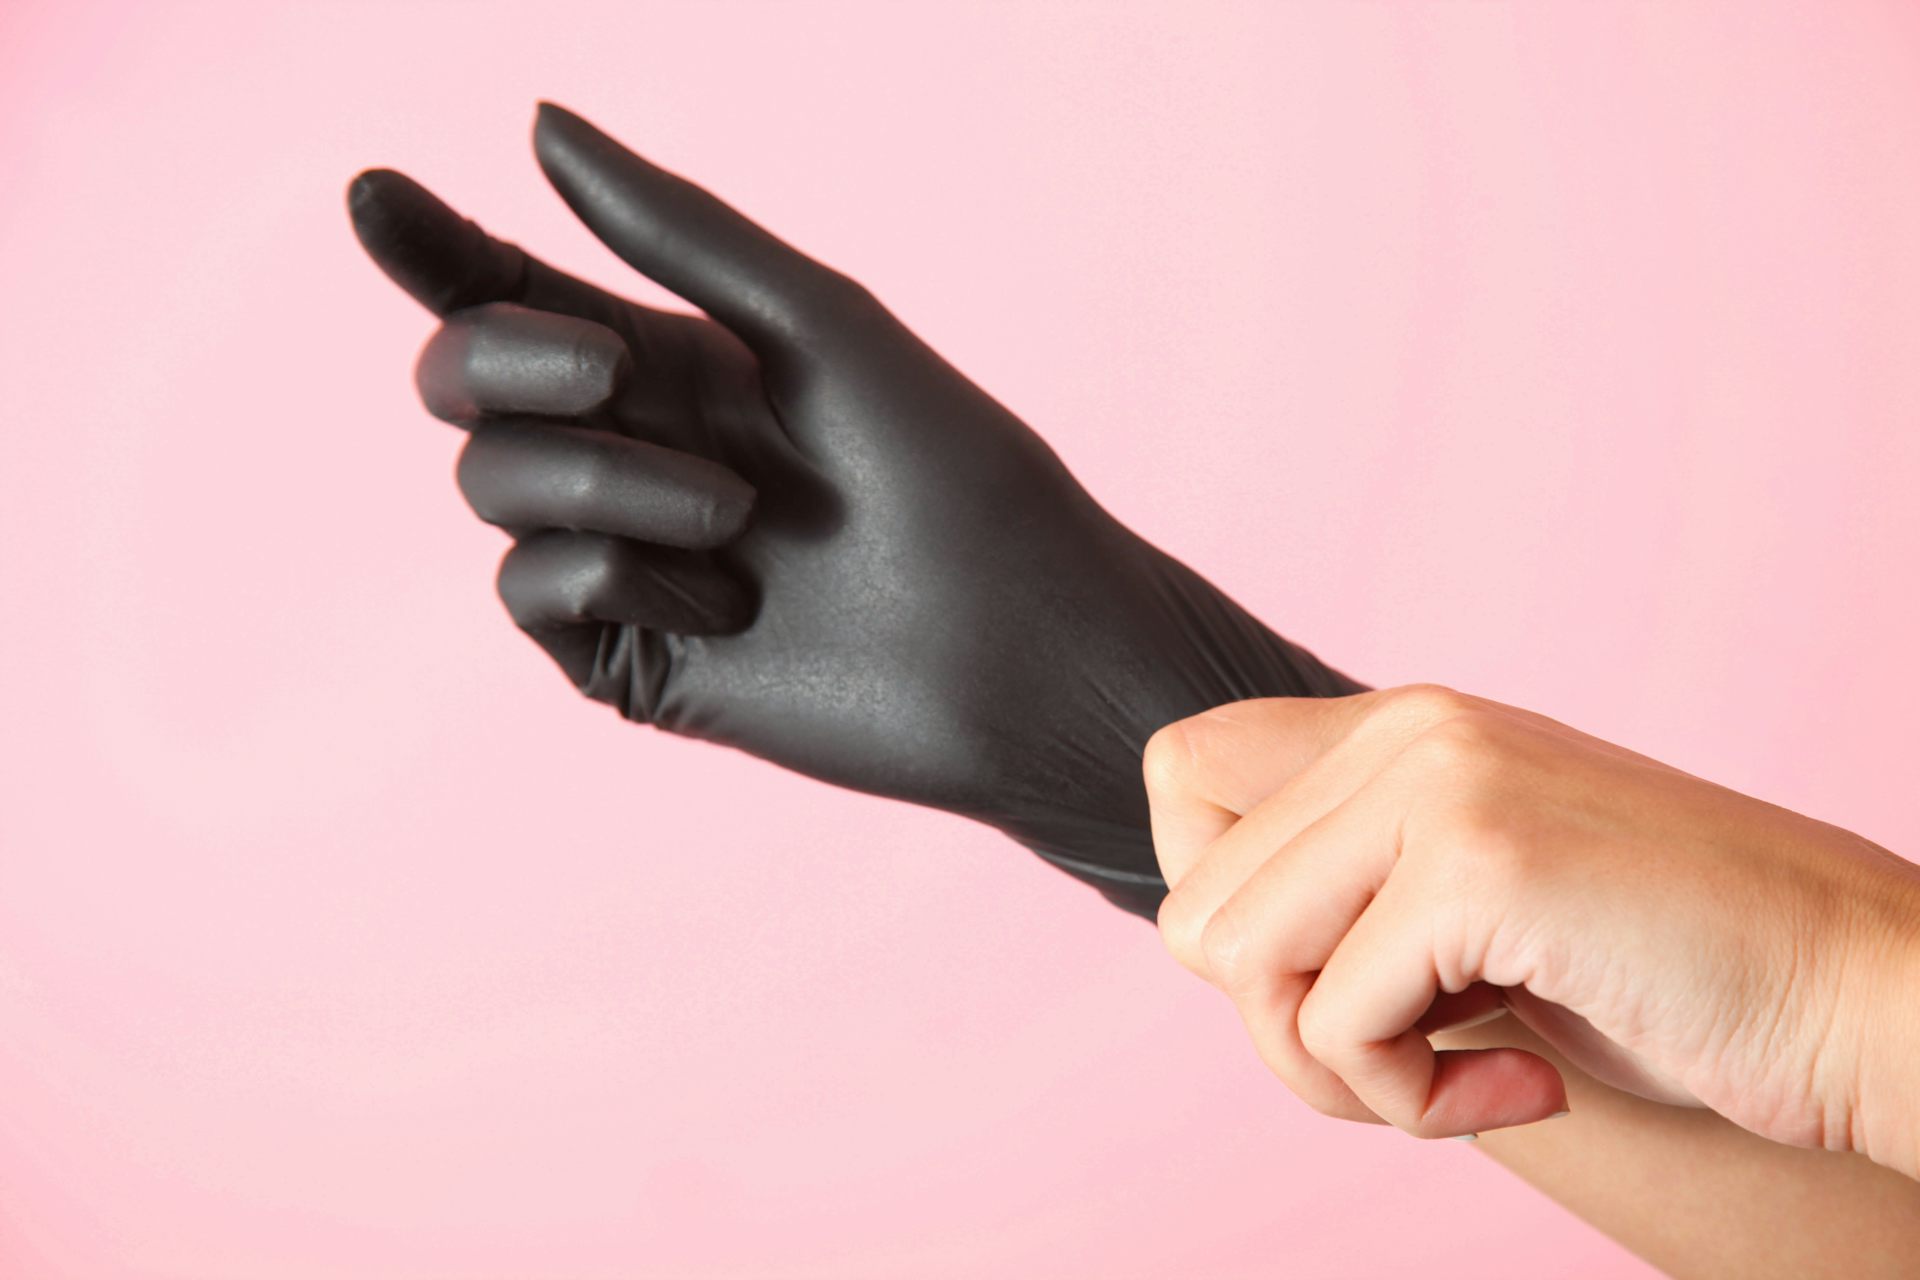 Yes, latex gloves can be part of a healthy relationship busting the myths around sexual fetishism picture